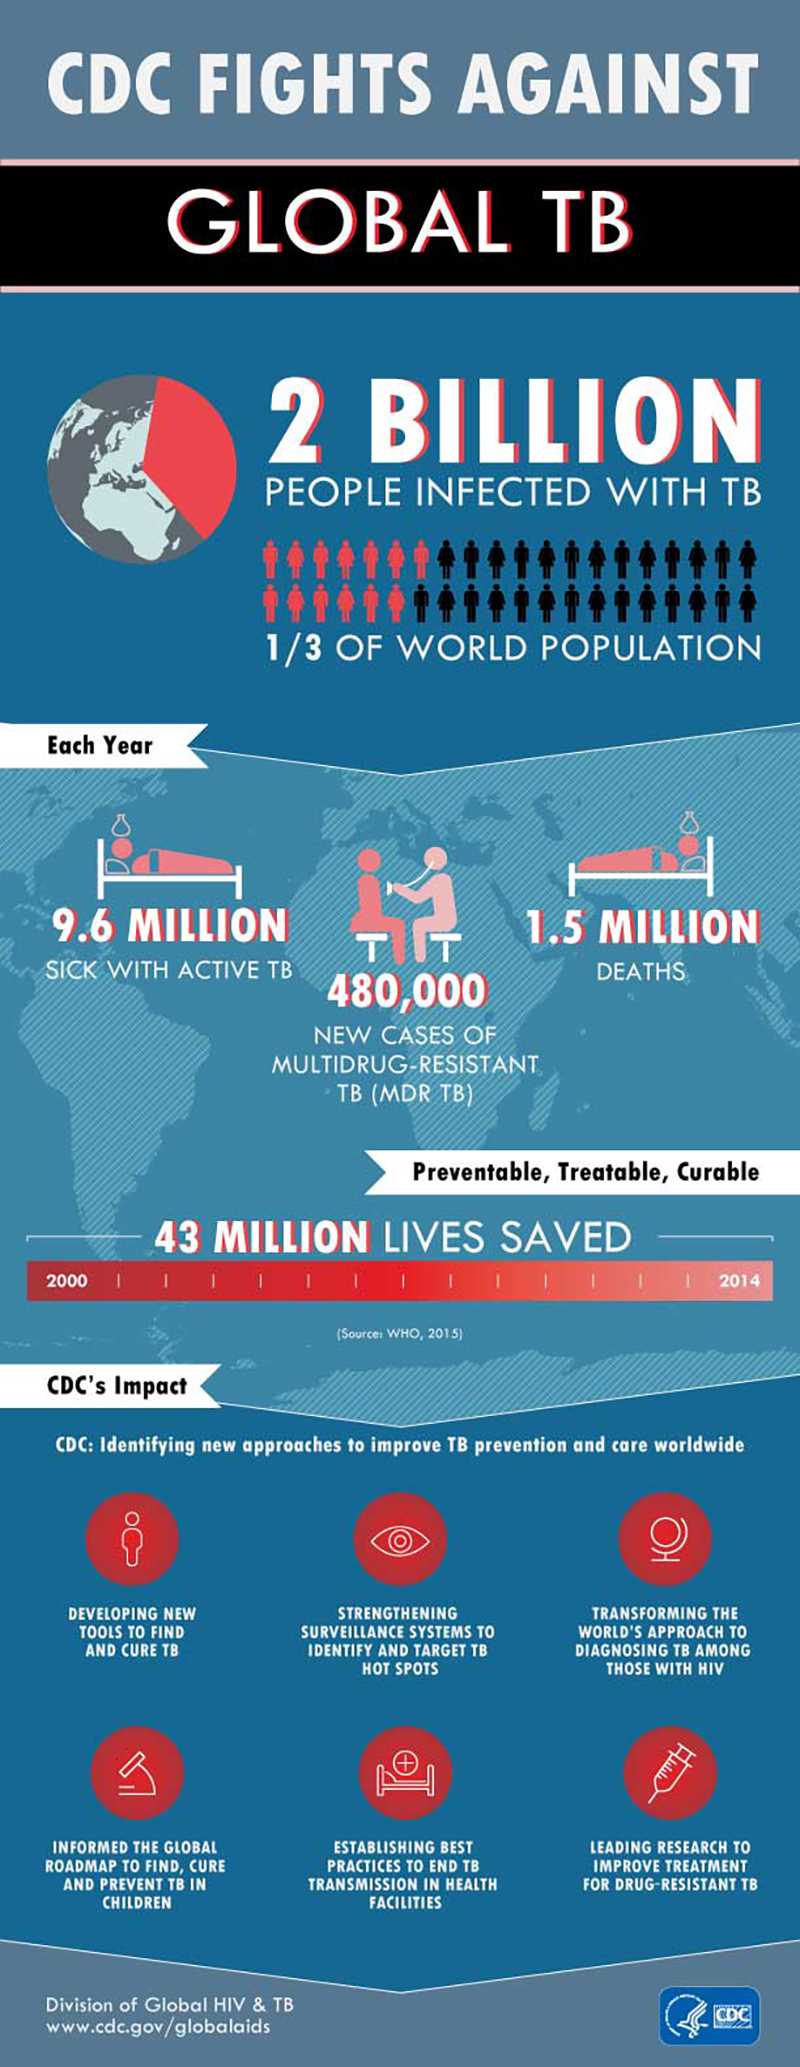 CDC Fights Against Global TB: 2 billion people infected with TB -  1/3 of the world population